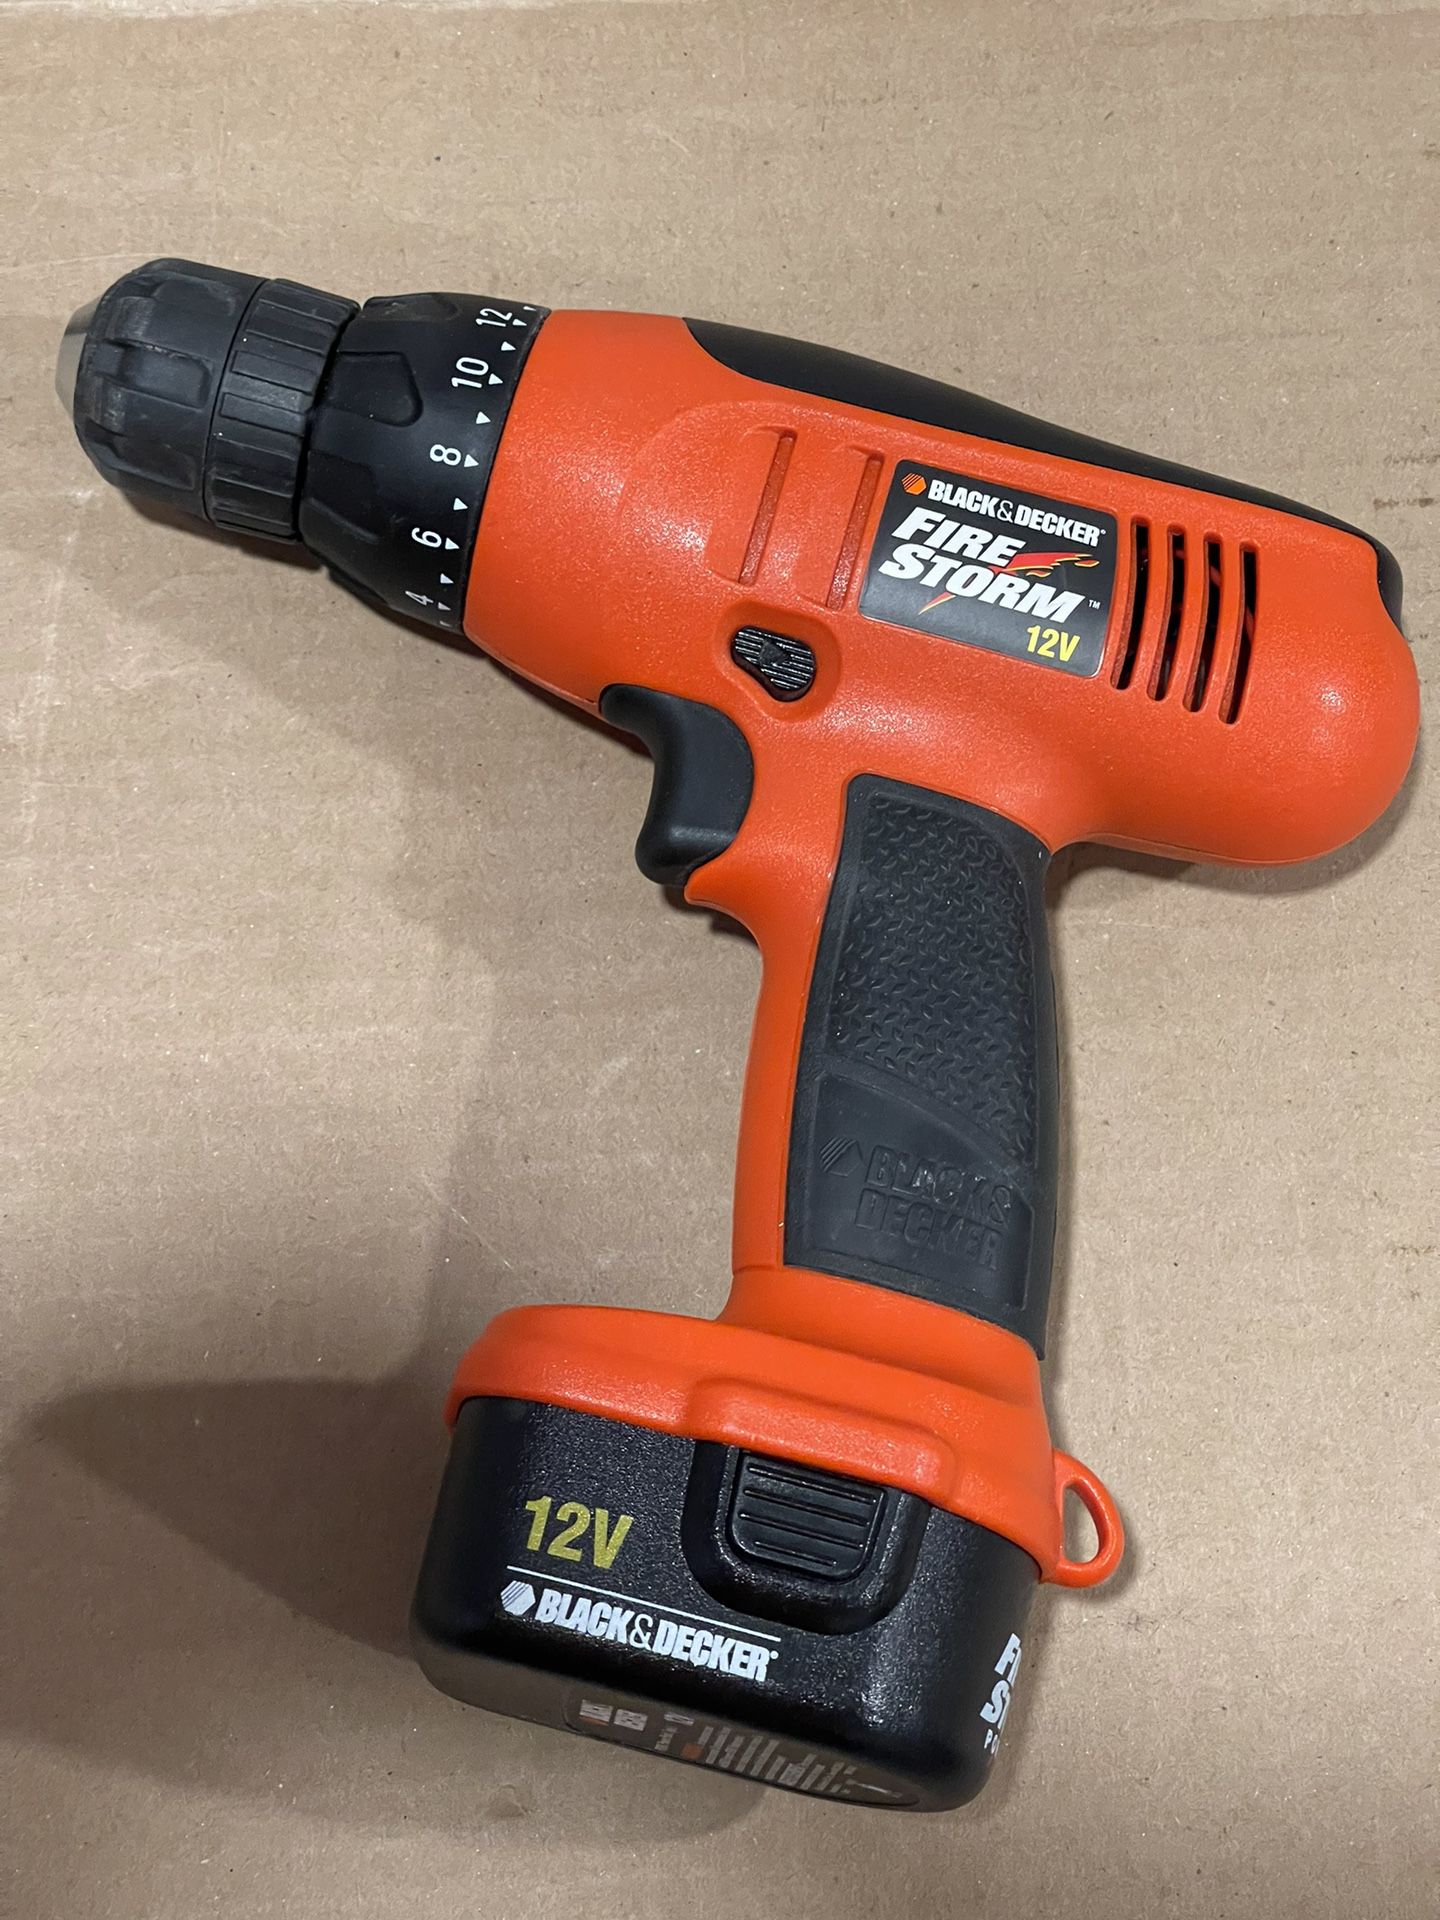 Black and Decker Firestorm ss1800d 18 Volt Drill with Torques (SOLD) for  Sale in Slidell, LA - OfferUp